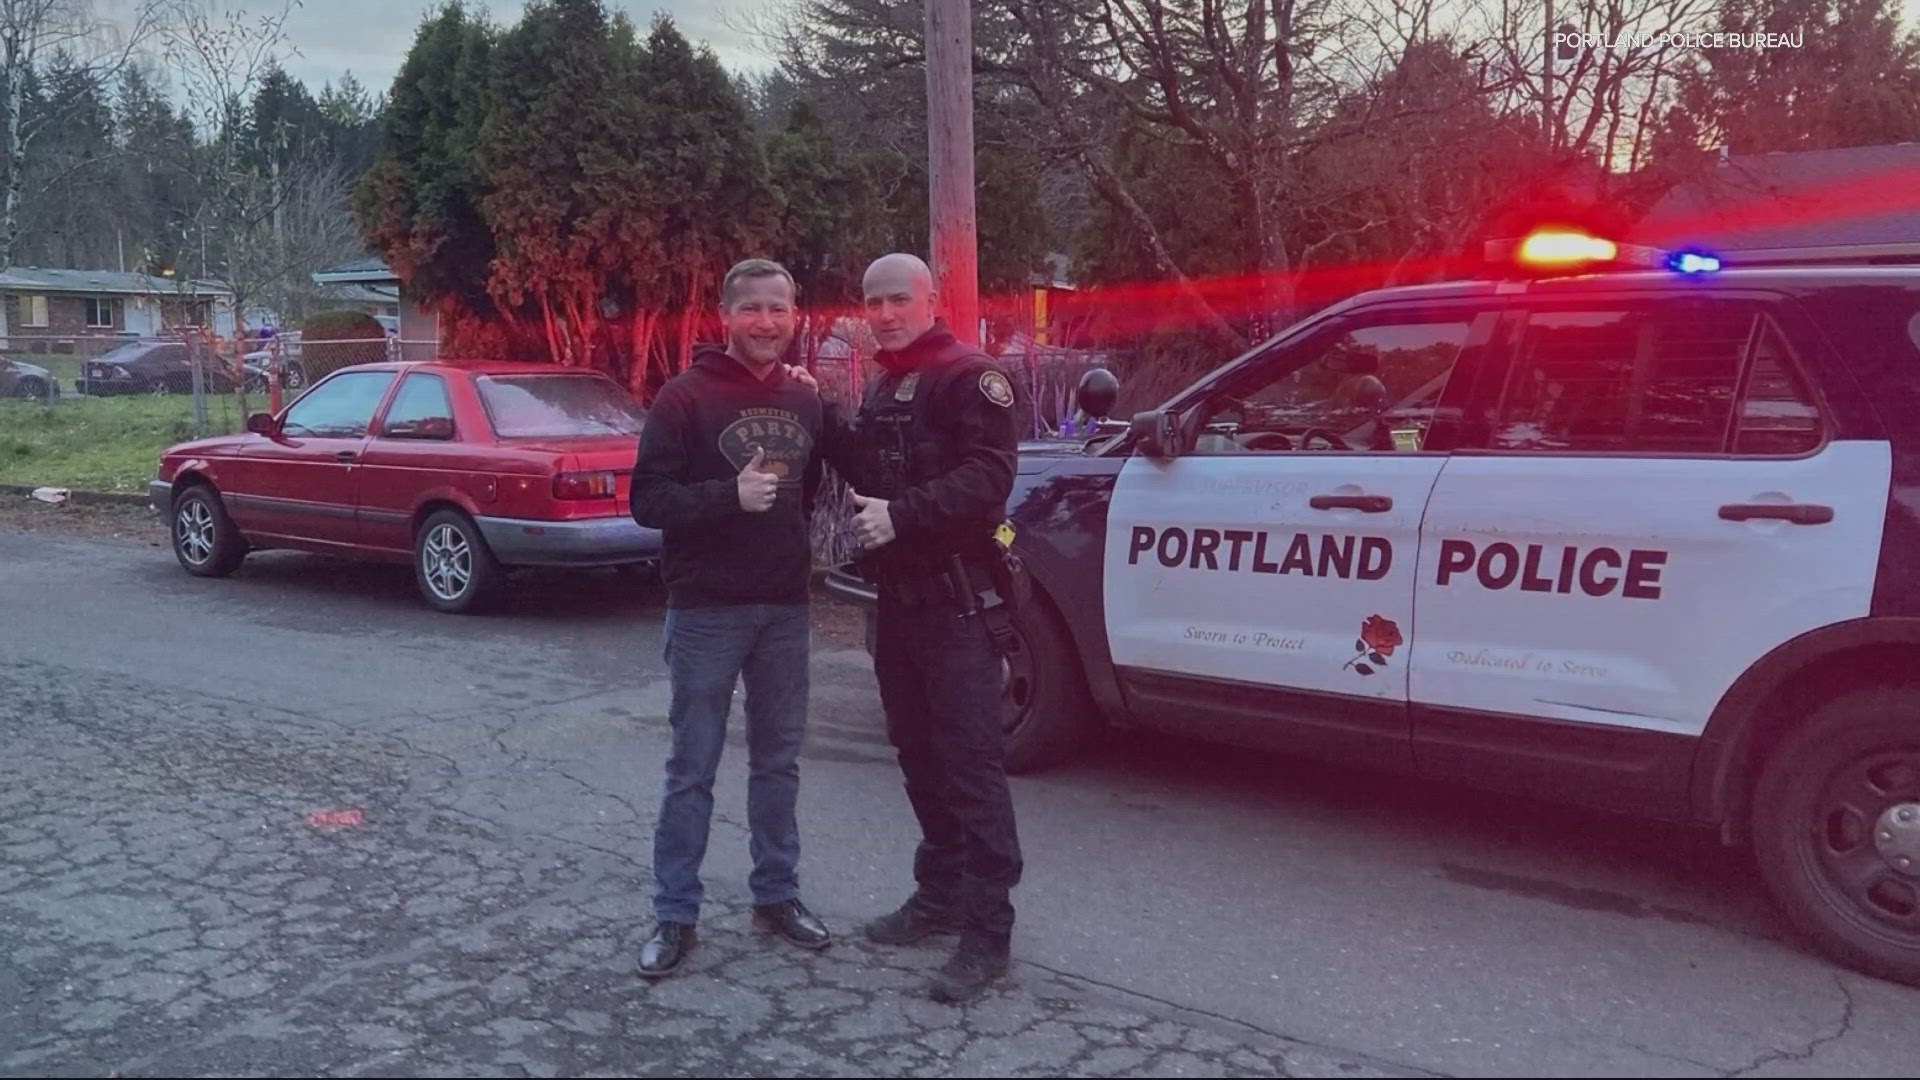 An unlikely partnerships yield significant results as Portland Police report a drastic decrease in stolen vehicles.